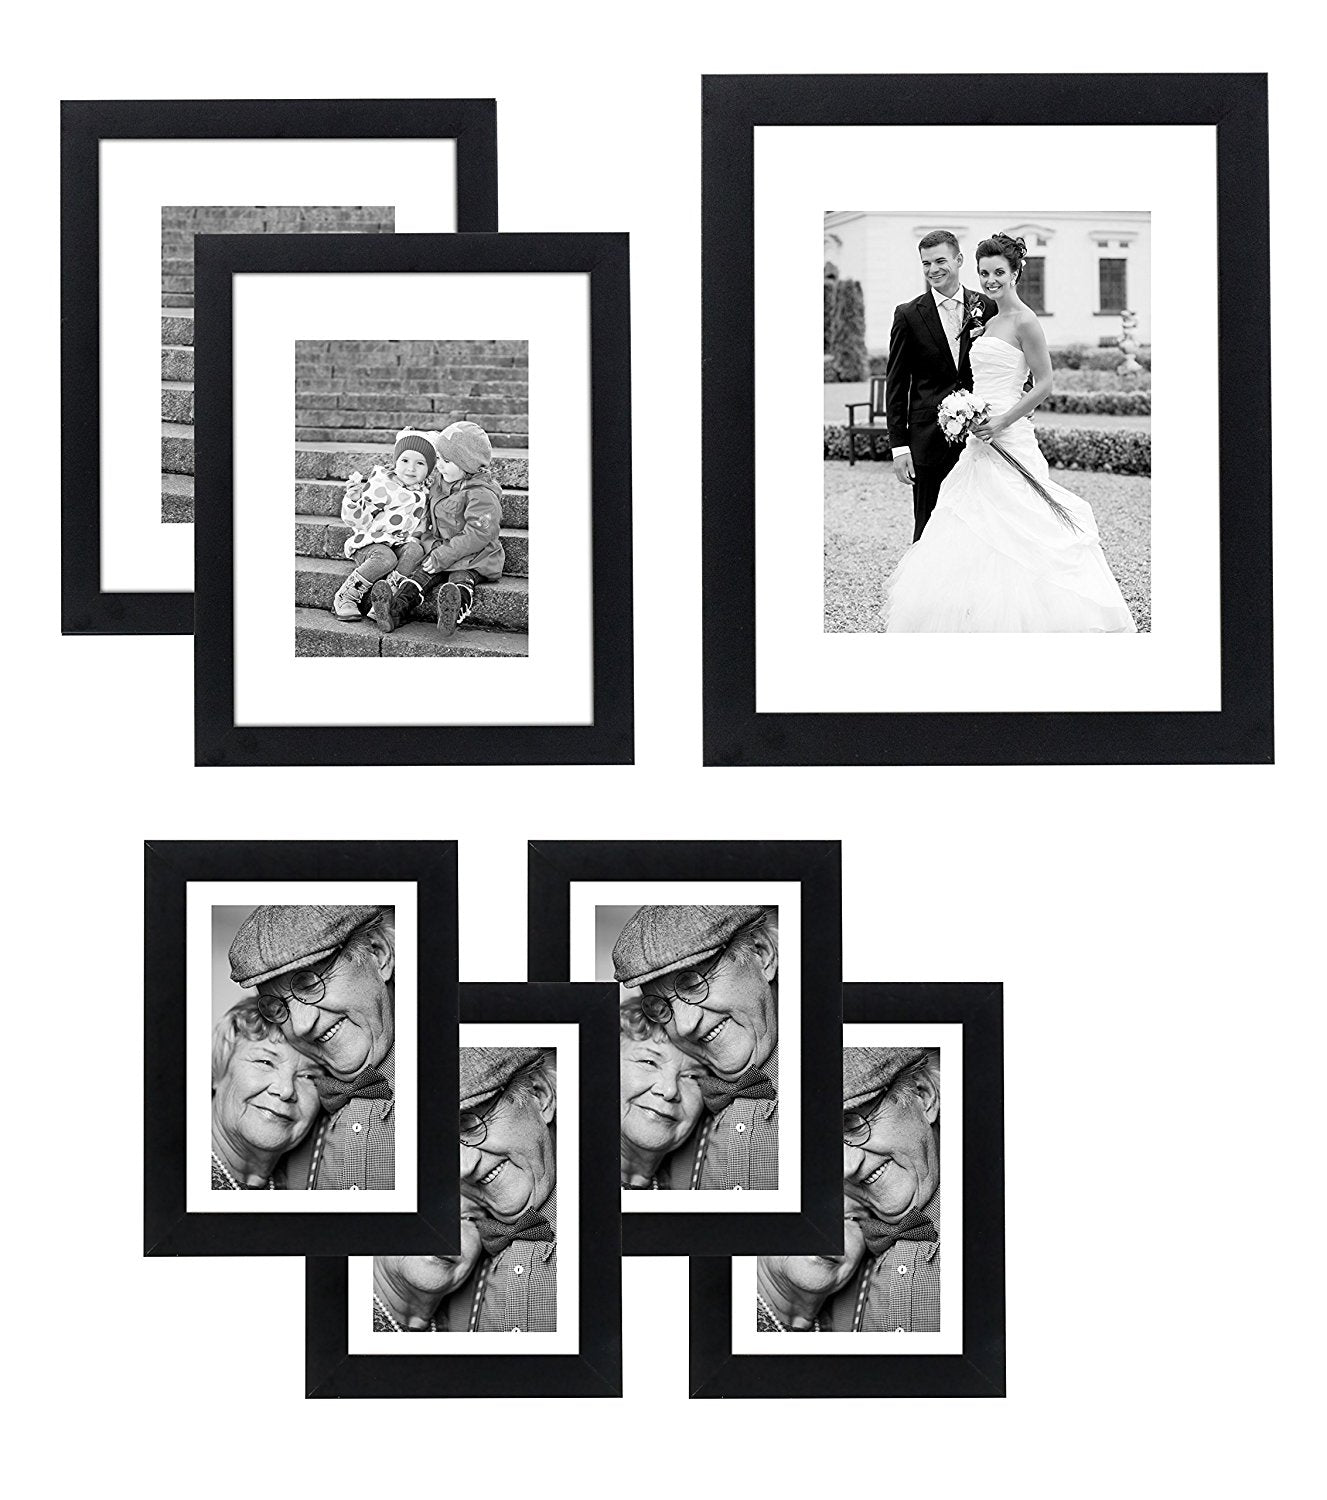 Americanflat Rustic 5x7 Picture Frame Set of 4 - Use As 4x6 Picture Frame with Mat or 5x7 Frame Without Mat - Photo Frame with Textured Engineered